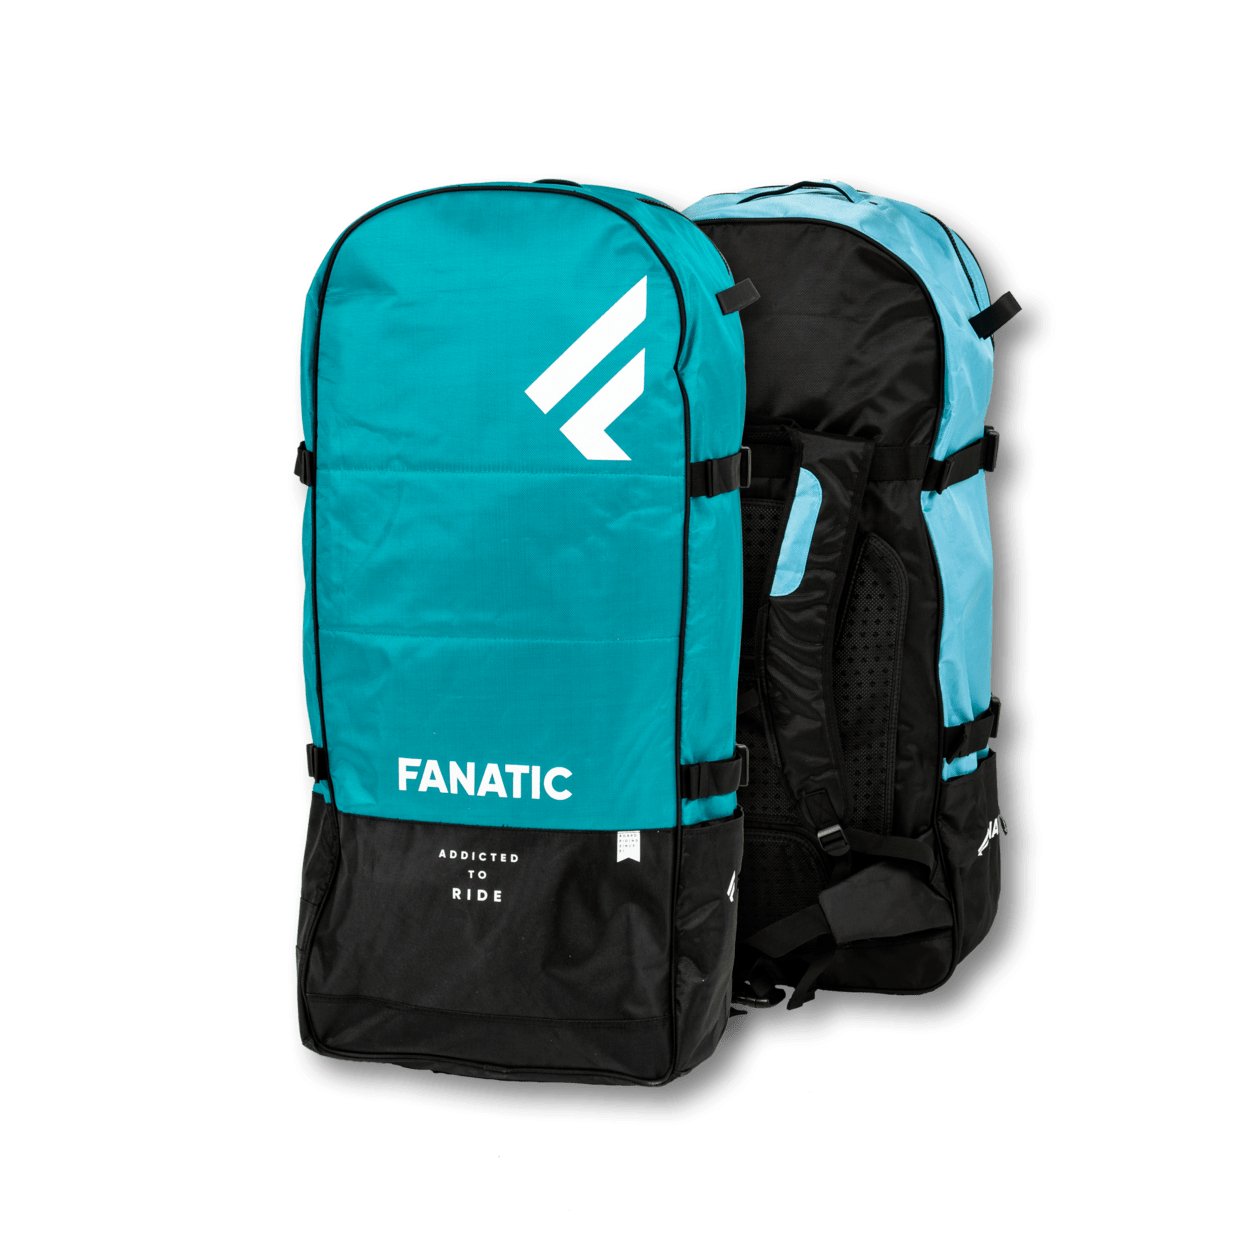 Fanatic Gearbag Pure iSUP 2023 - Worthing Watersports - 9008415928019 - Spareparts - Fanatic SUP